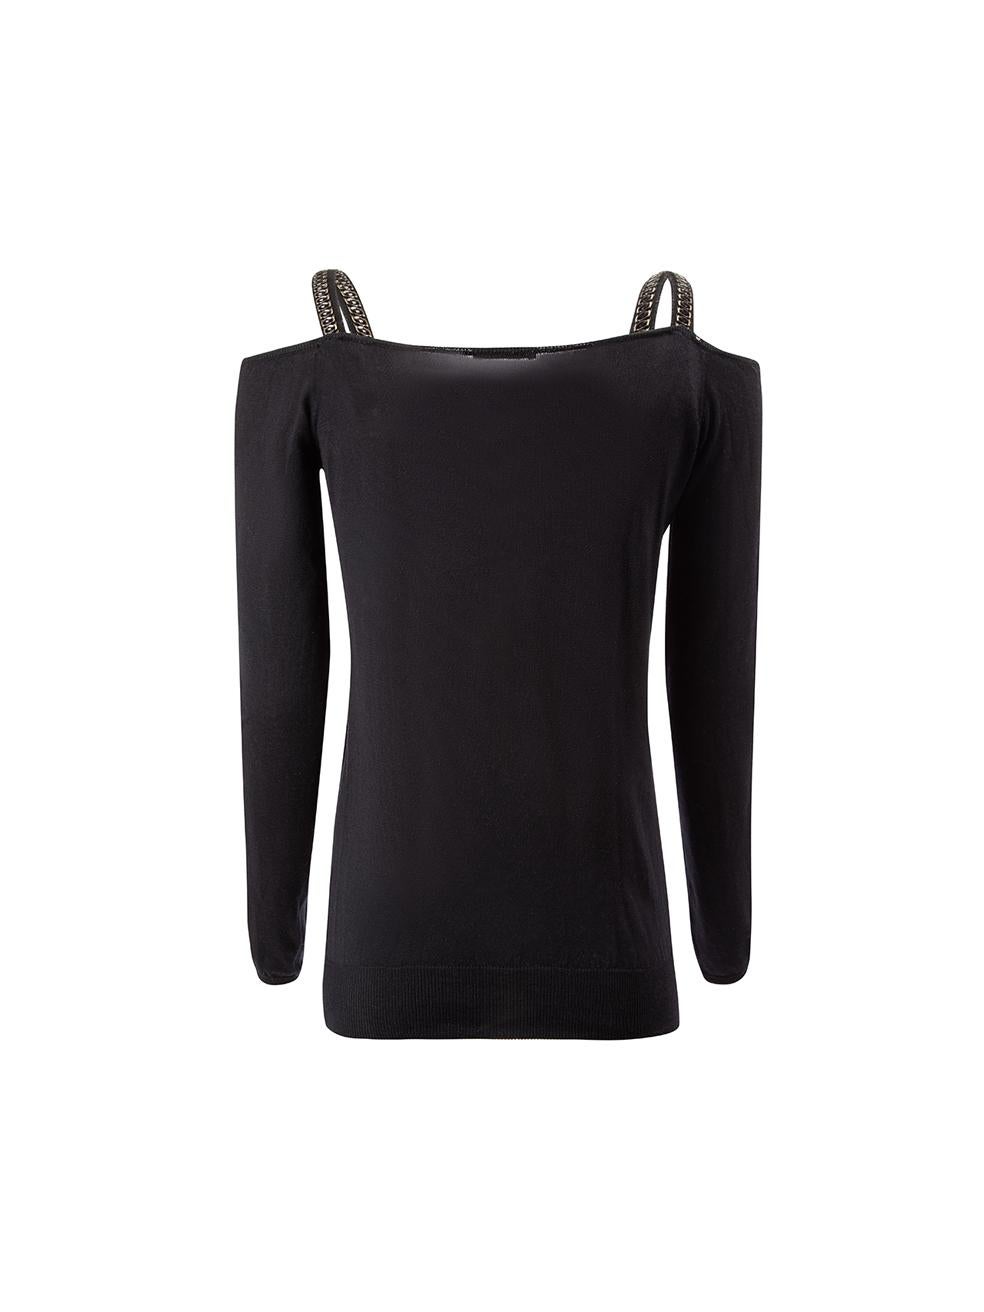 Prada Women's Black Embellished Cold Shoulder Knitted Top In Good Condition For Sale In London, GB